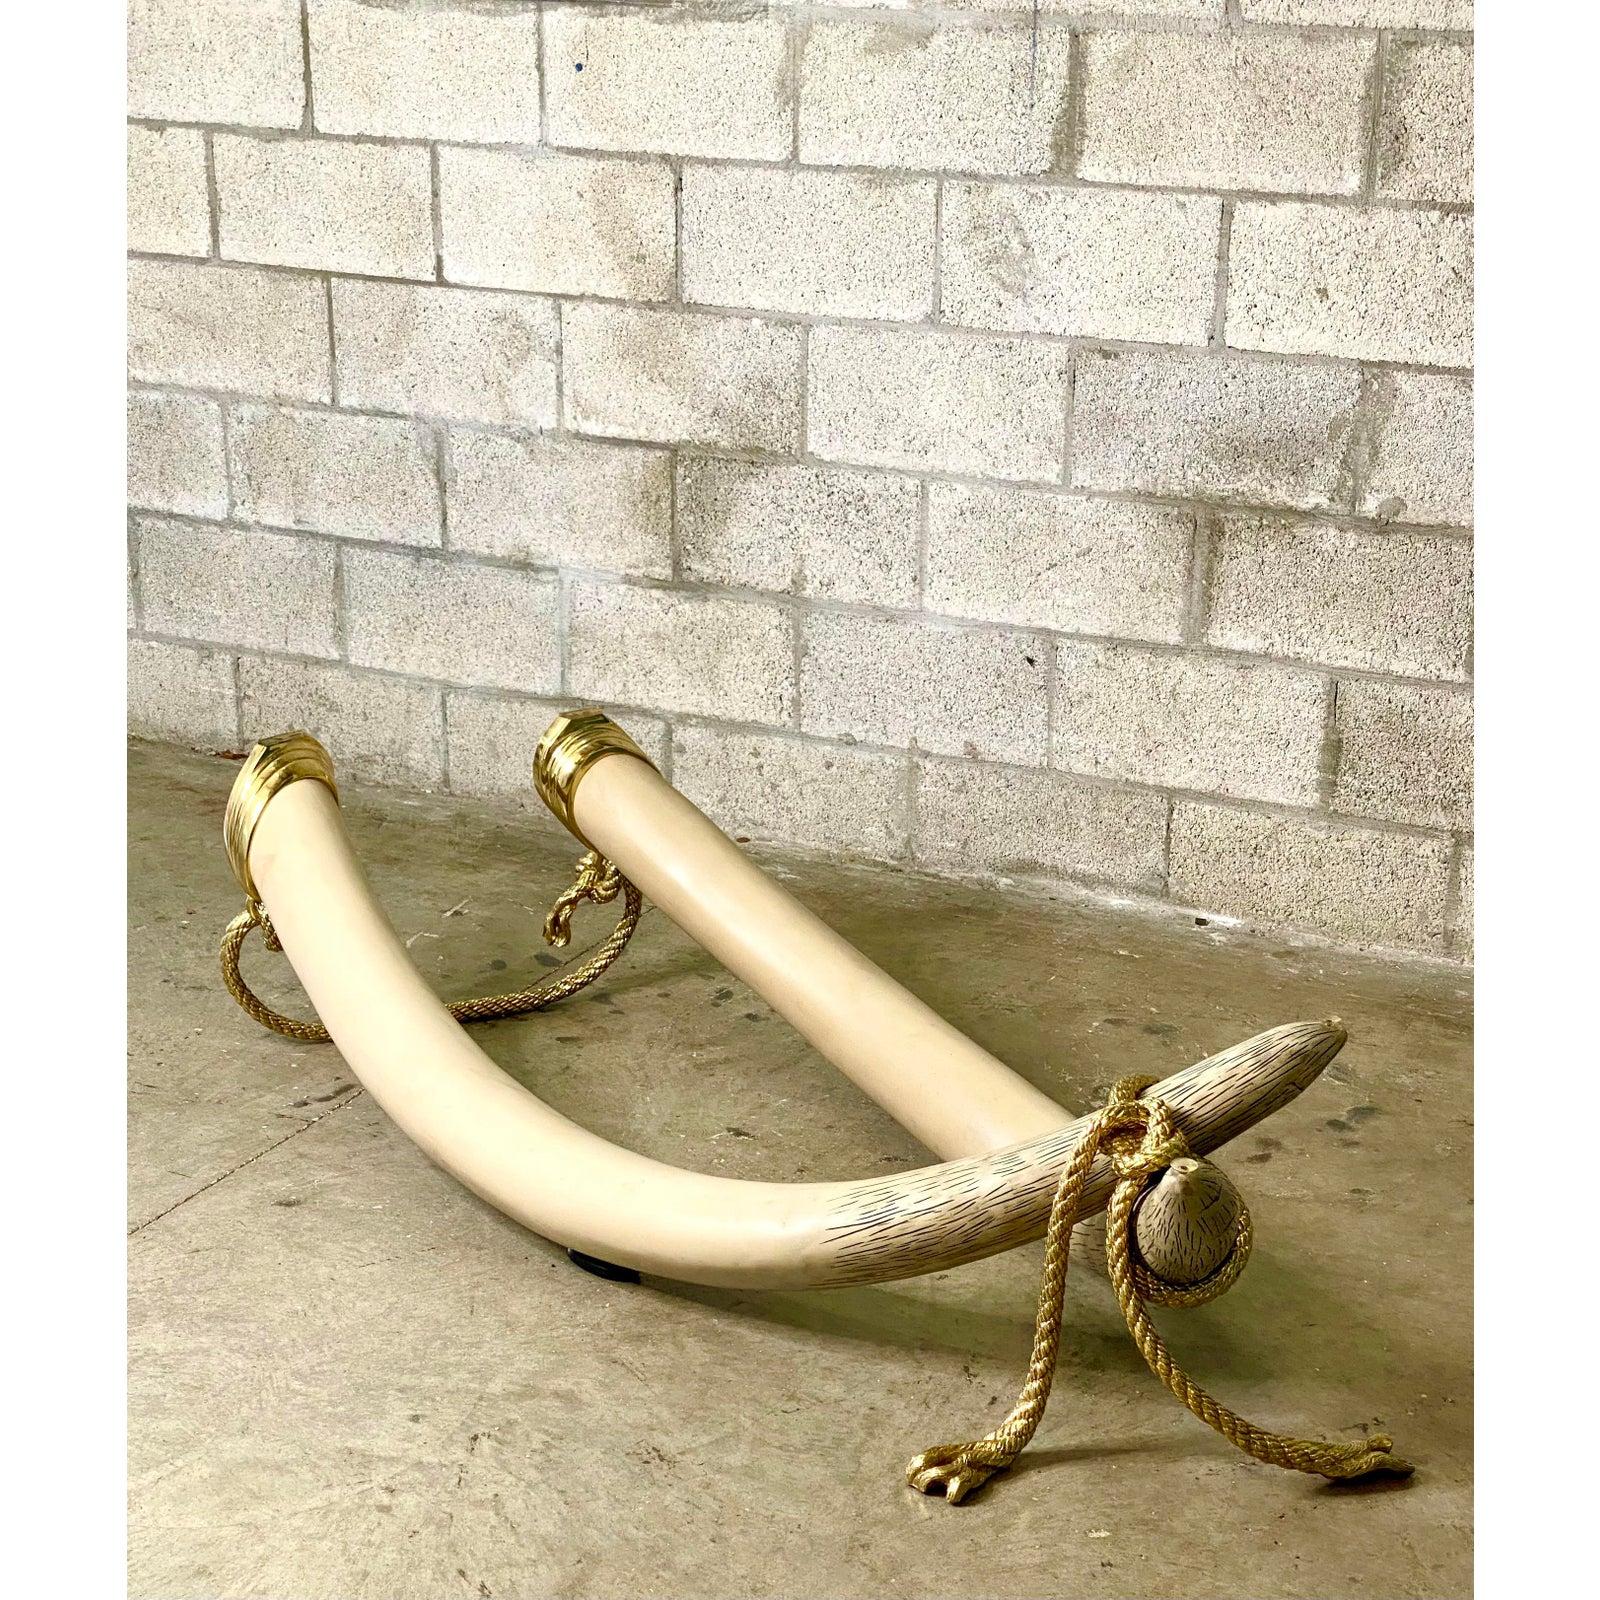 Spectacular 1970s Italo Valenti Brass and glass coffee table. Chic faux elephant tusks wrapped in a brass rope. The original brass rimmed glass top. Stamped on the brass. A real collectors item.